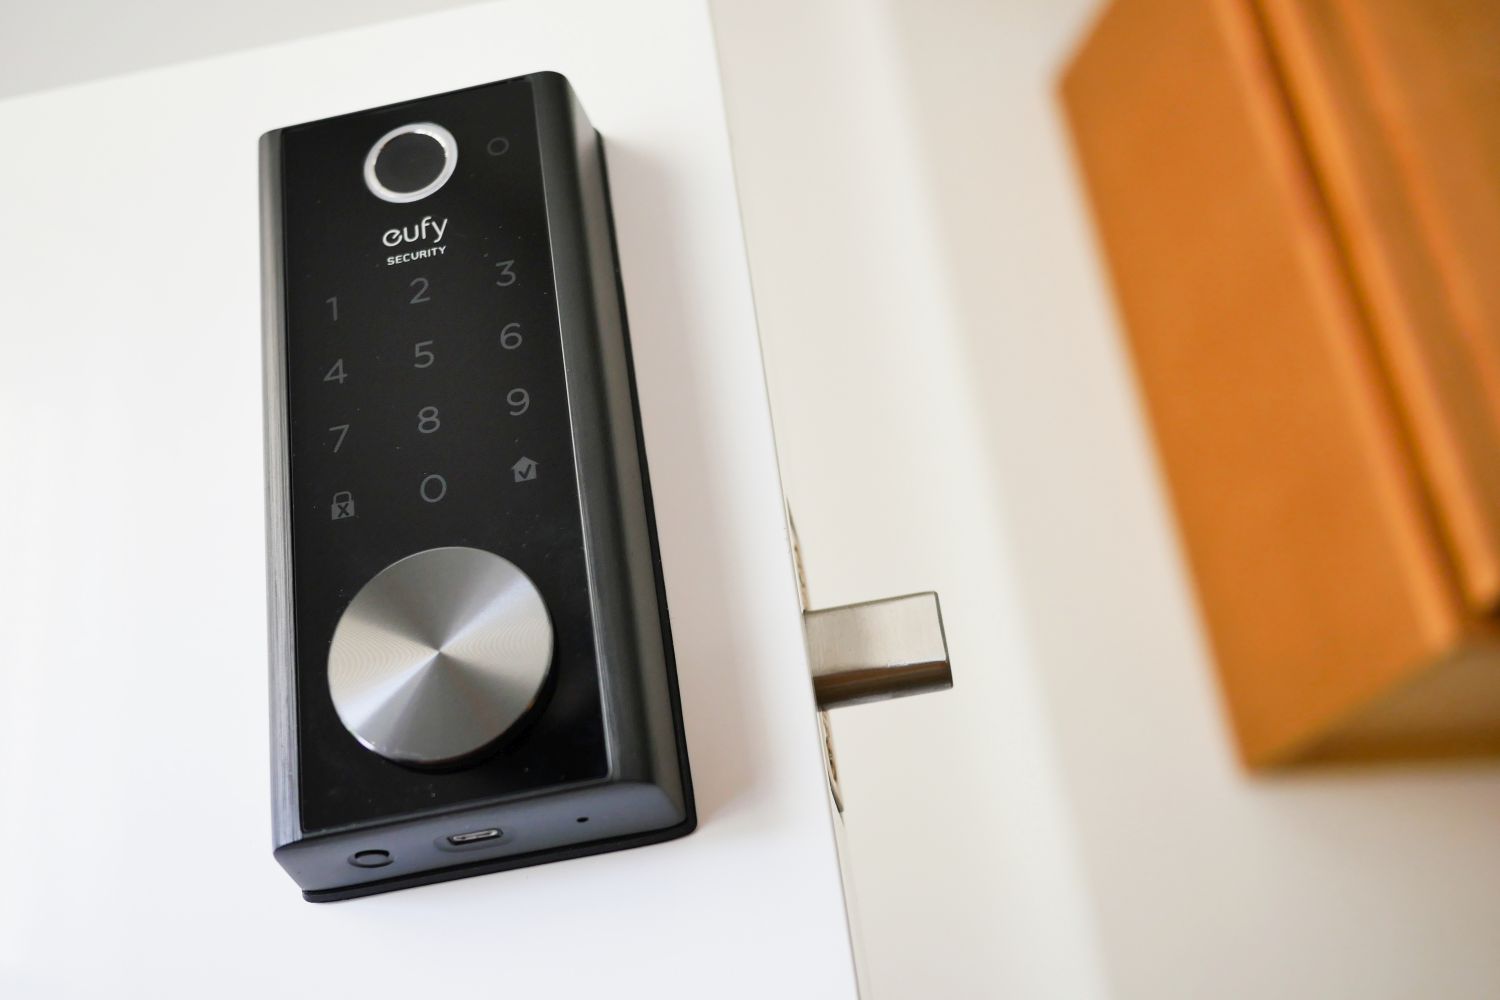 https://www.digitaltrends.com/wp-content/uploads/2020/07/eufy-smart-lock-touch-review-4-of-11.jpg?fit=1500%2C1000&p=1